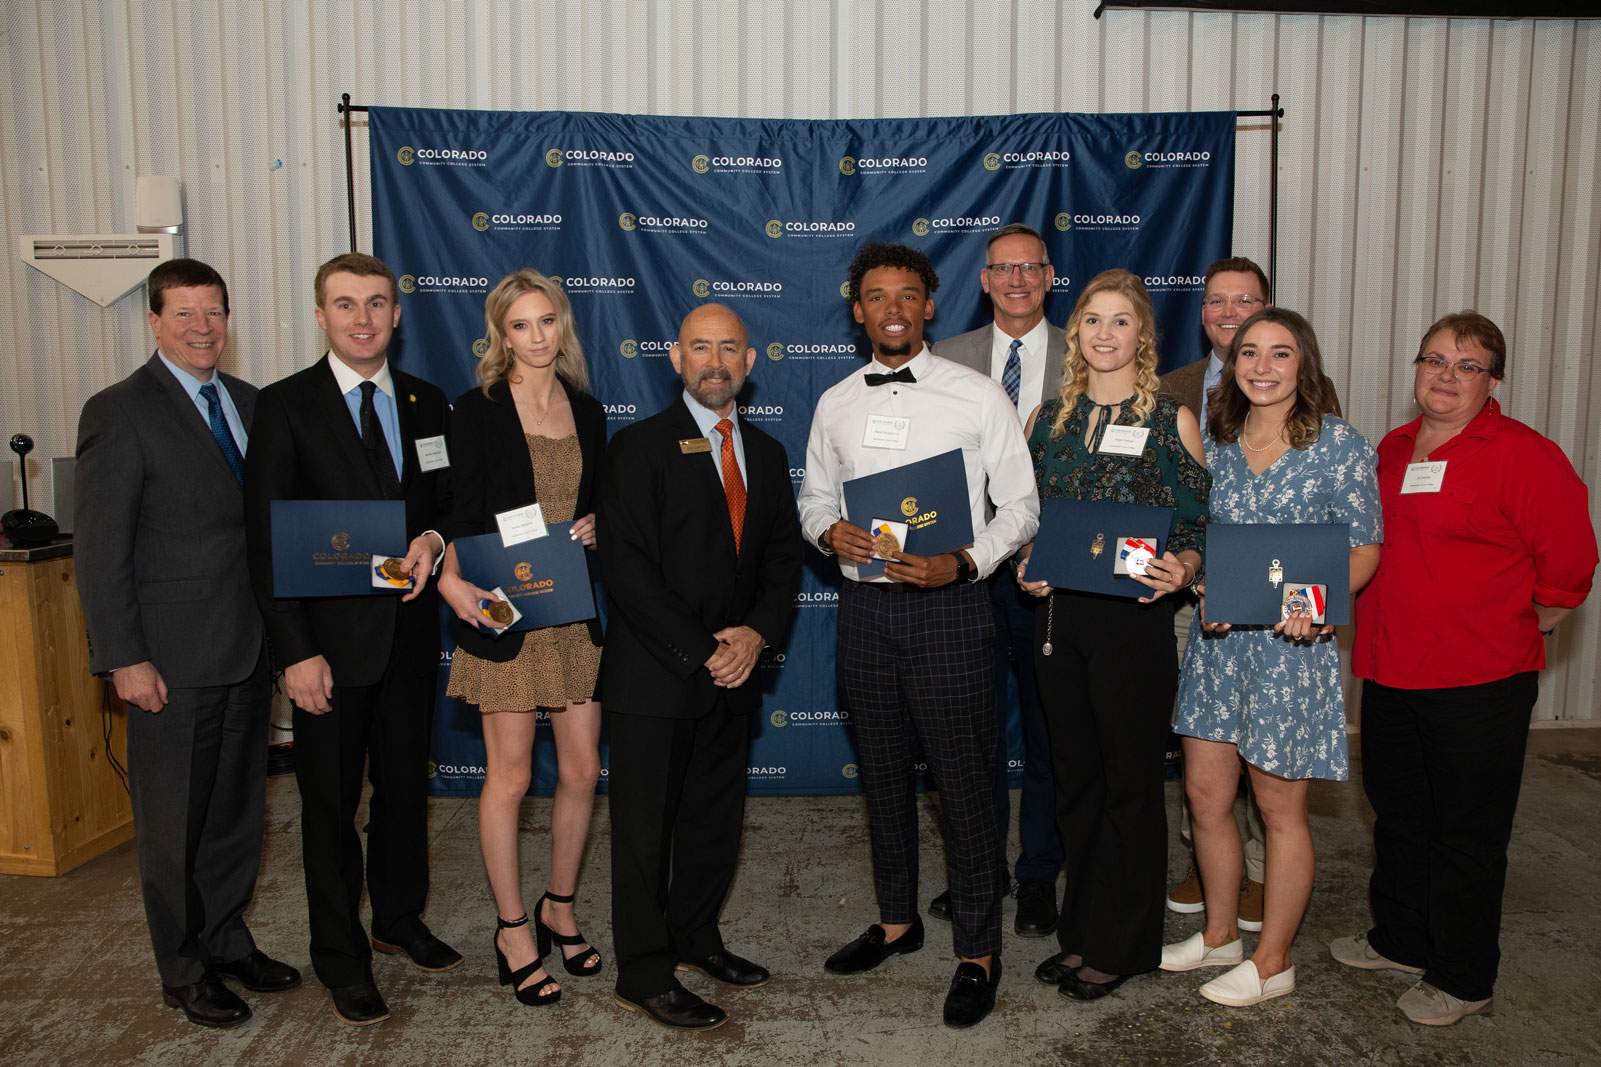 CCCS Student Awards picture featuring Mike White, Brandon Melnikoff, Noelle Meagher, Chancellor Joe Garcia, Steve Spurgeon, Steve Smith, Paige Finegan, Tim Stahley, Kat Marty, and Jeri Garrett